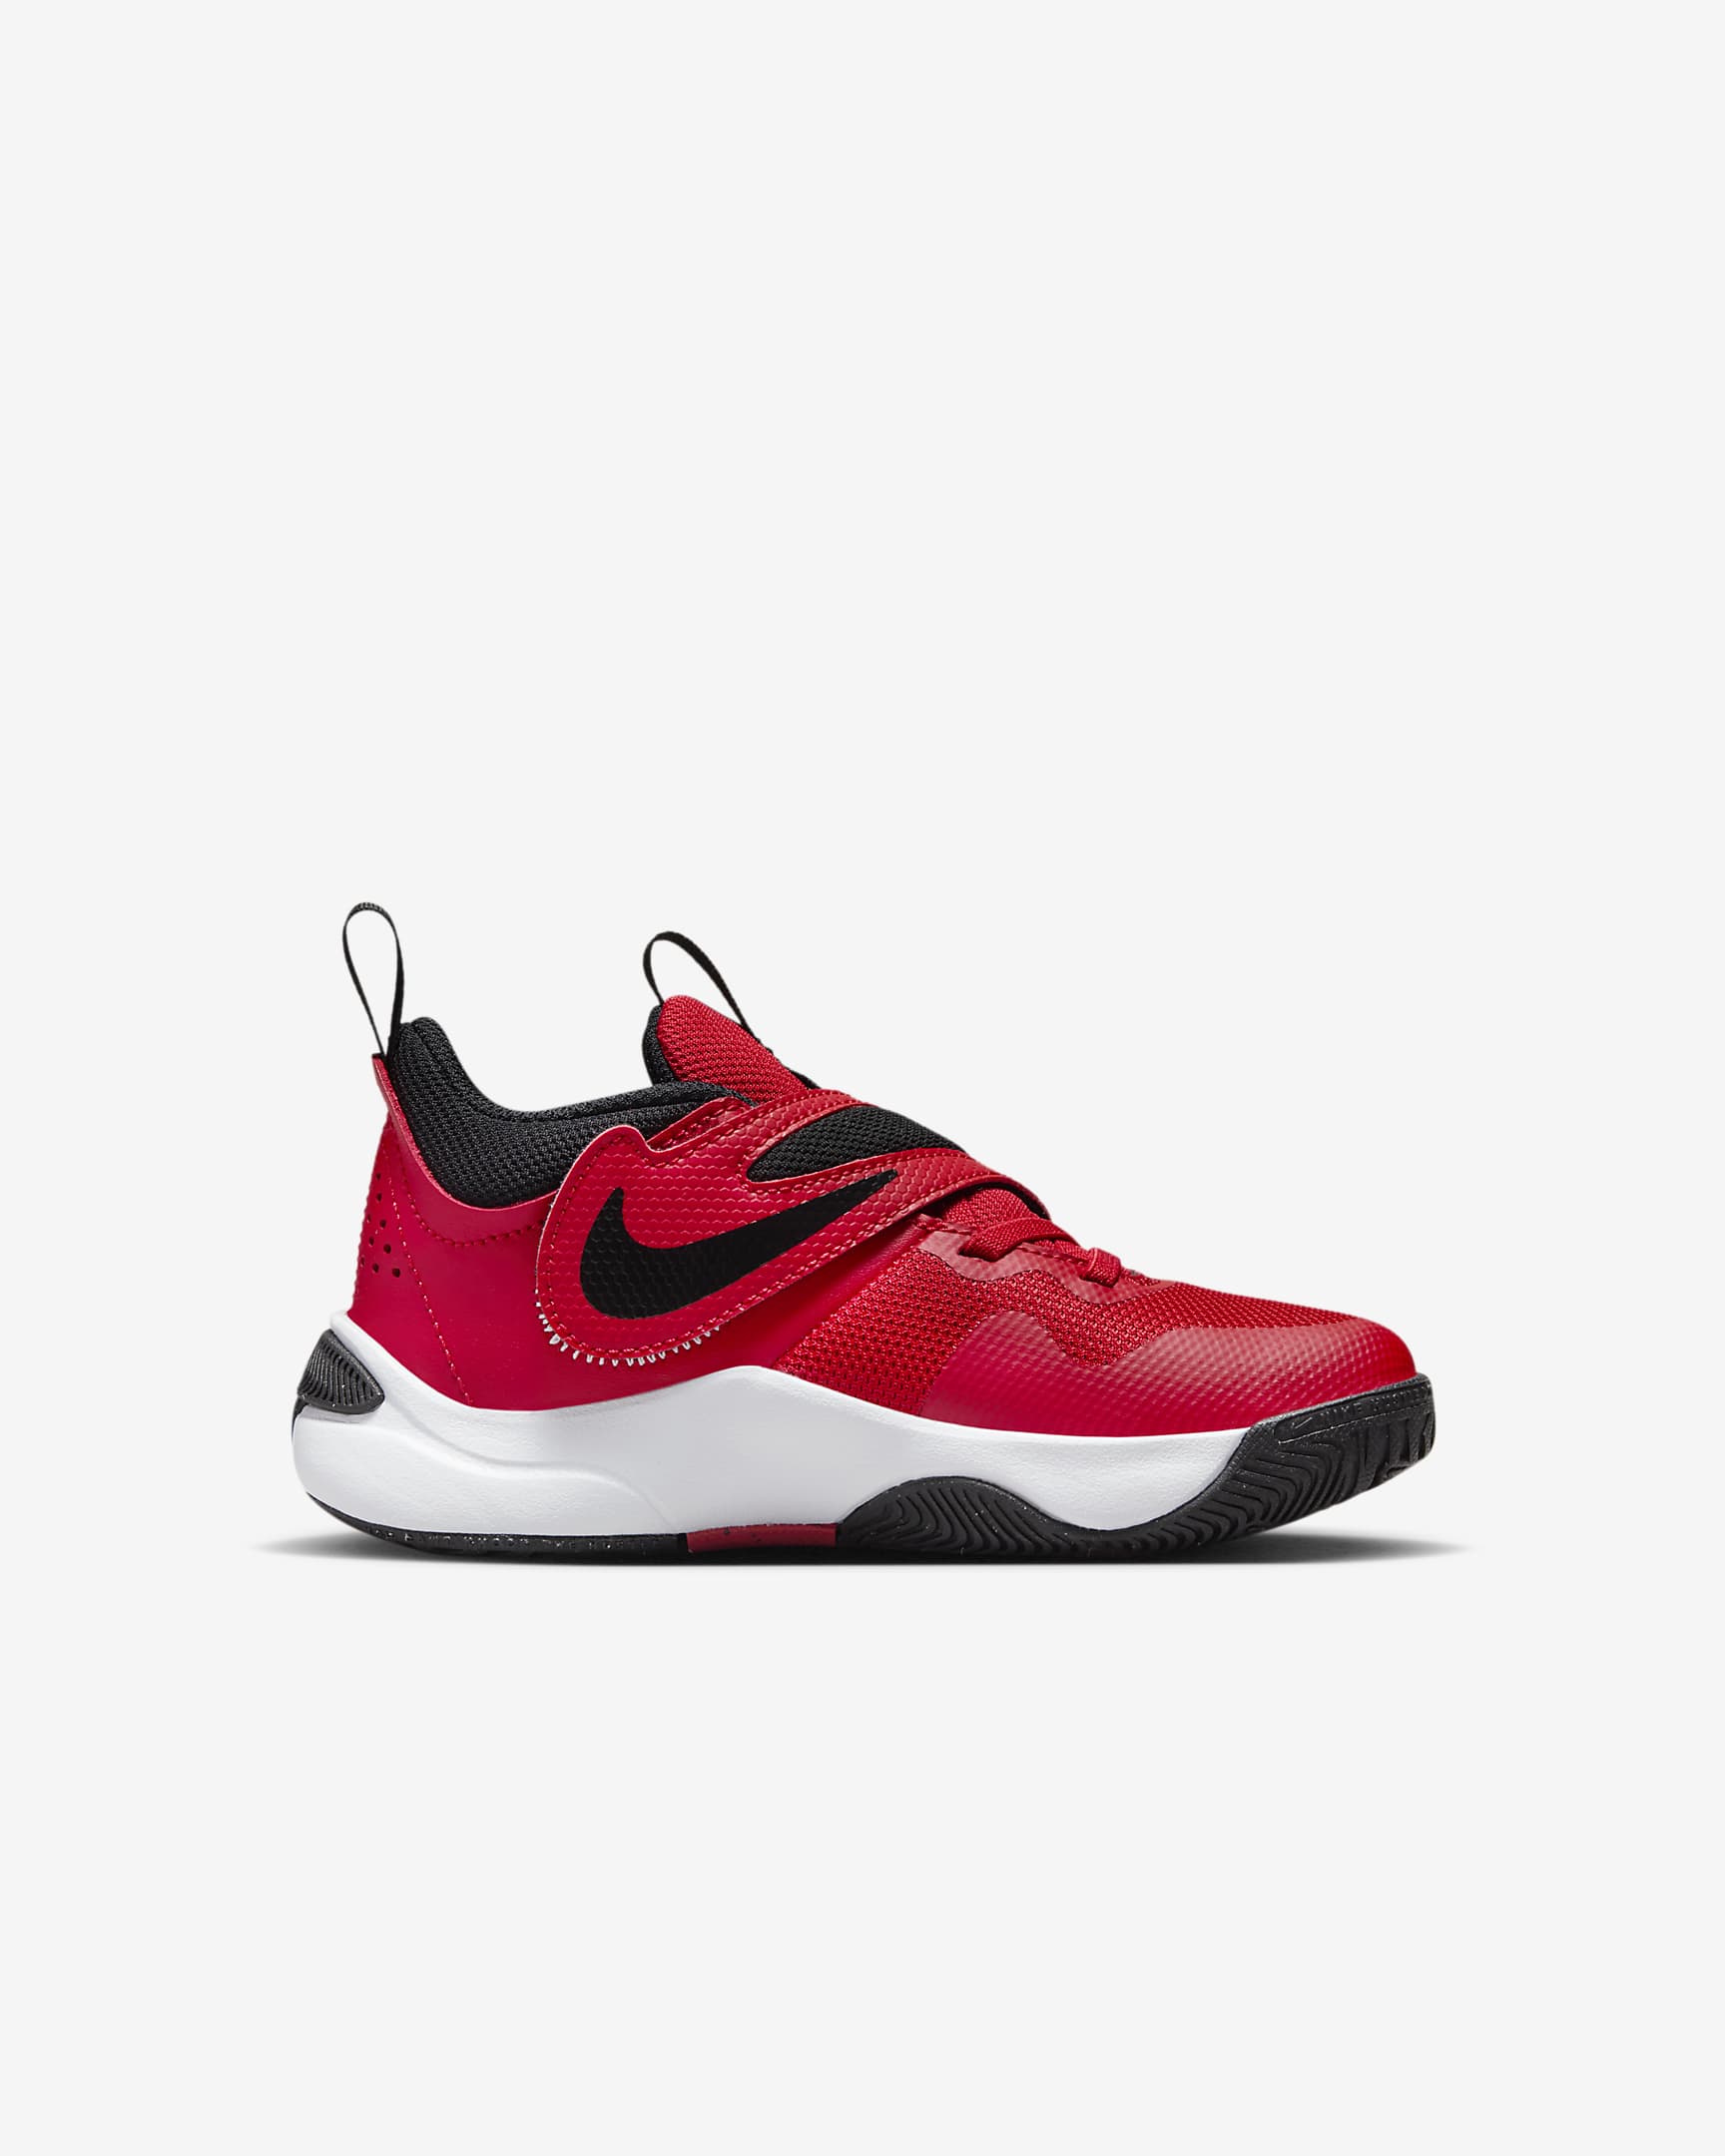 Nike Team Hustle D 11 Younger Kids' Shoes. Nike IE